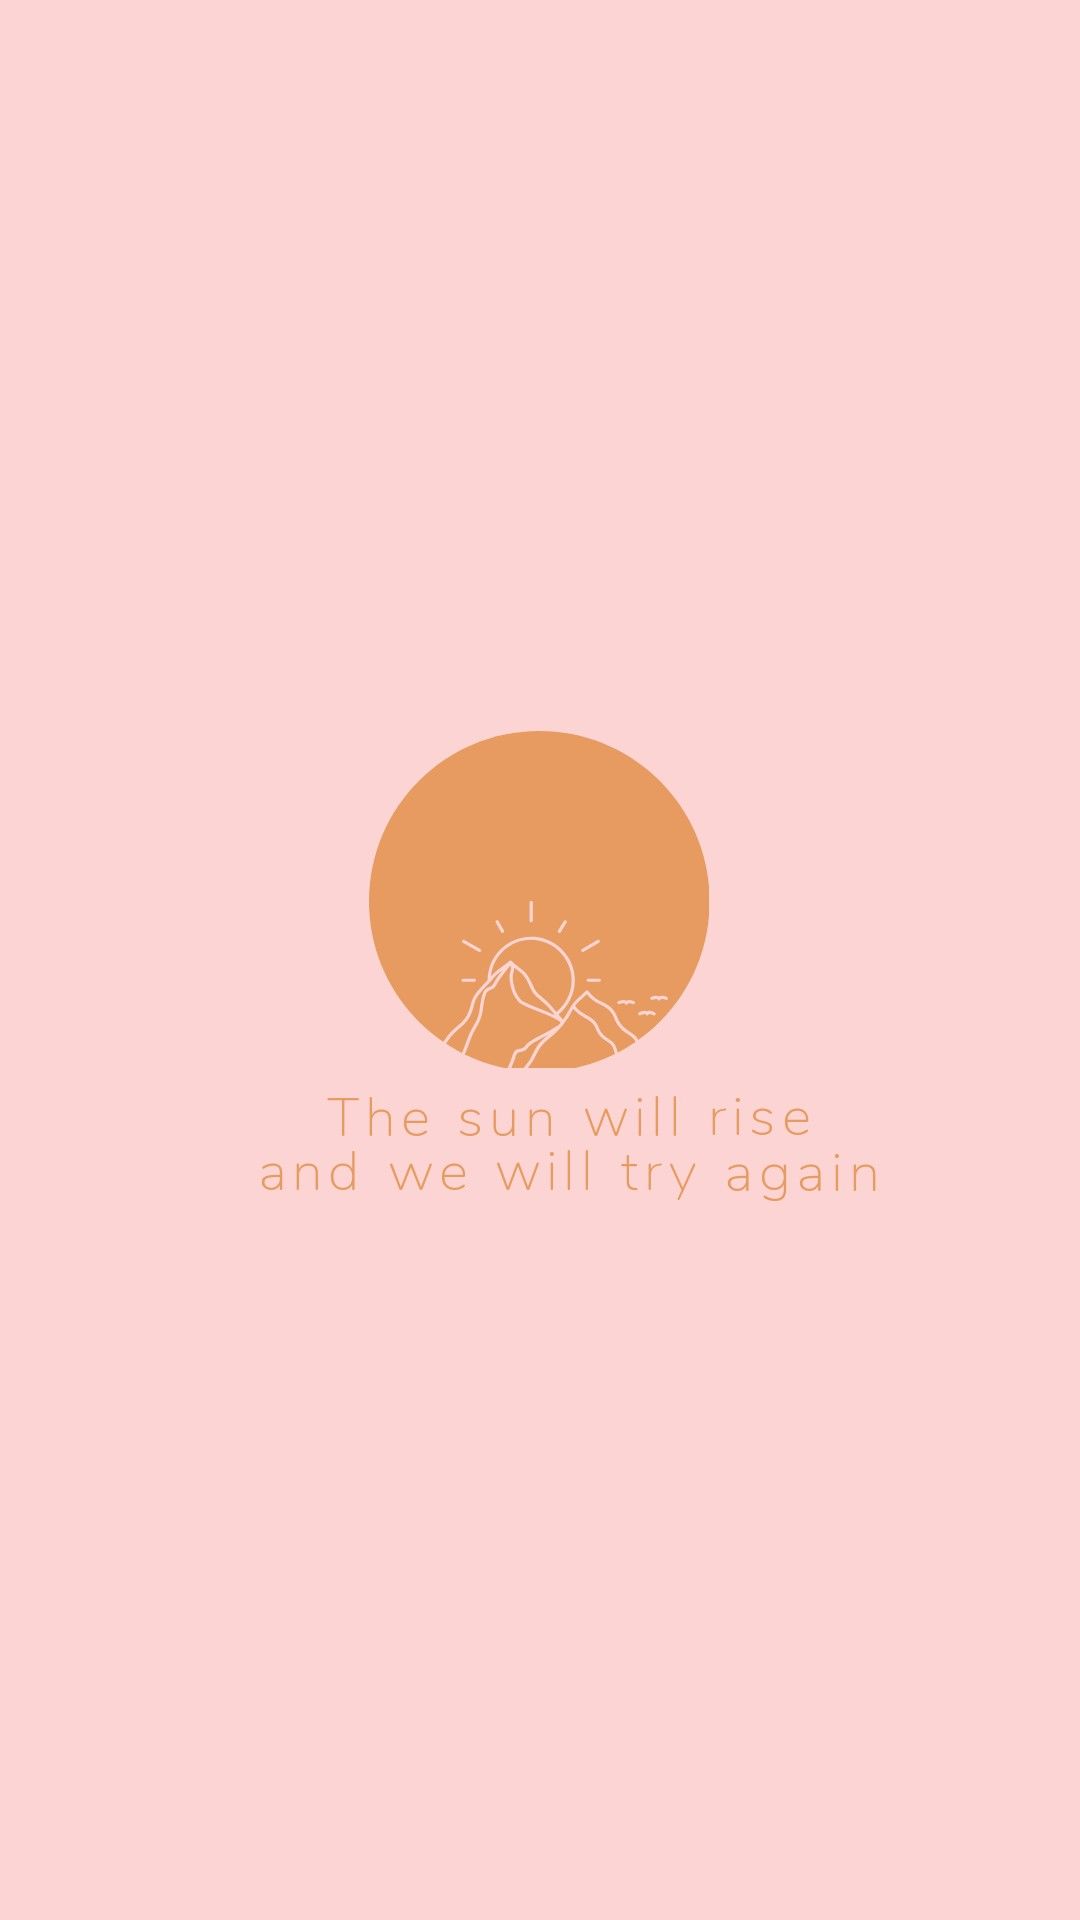 The Sun Will Rise And We Will Try Again Inspirational Motivational Quo